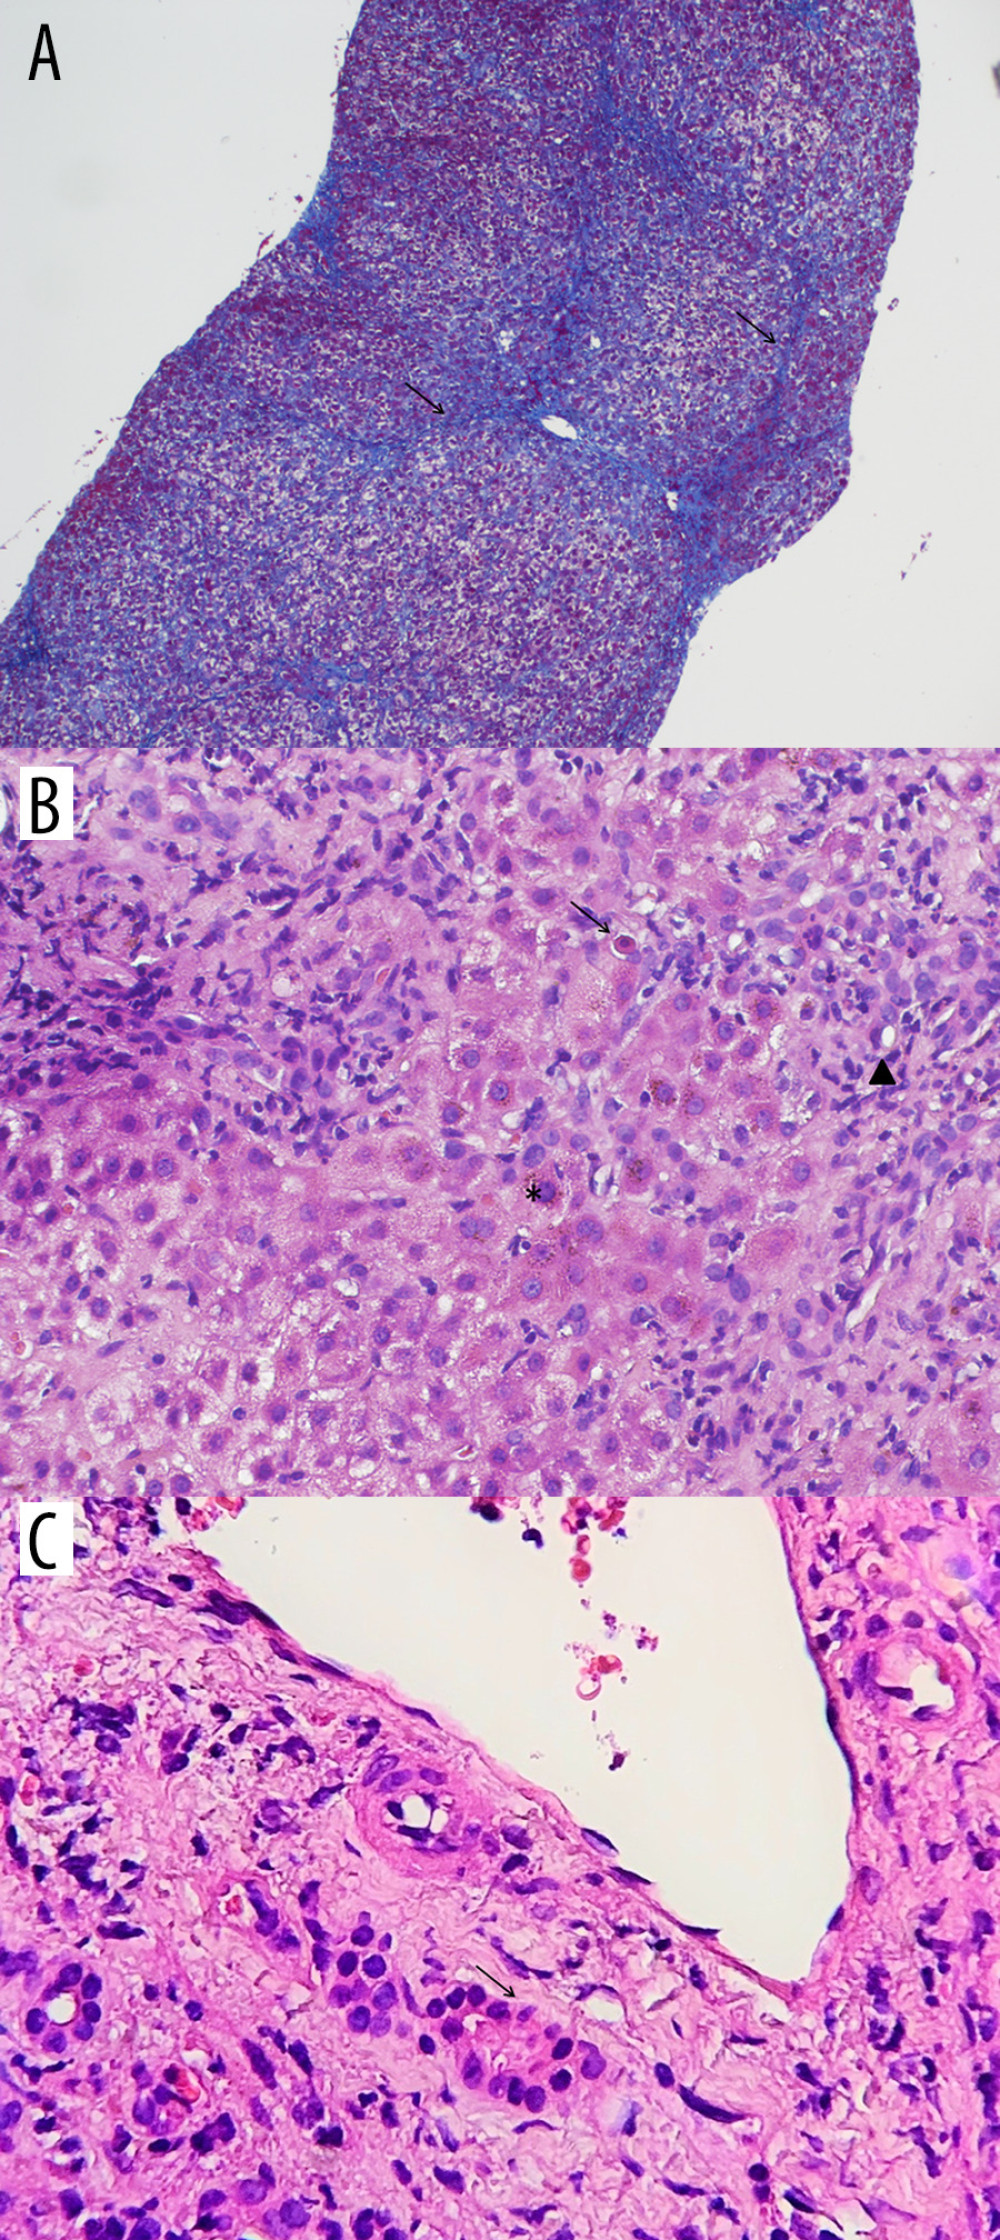 (A) Low magnification of liver parenchyma, exhibiting initial architectural distortion with pericellular fibrosis and delicate septa (arrows), due to recent extracellular matrix deposition (Masson trichrome stain, 4×). (B) Medium magnification of portal area with an acute and chronic infiltrate, ductular reaction (arrow head), and prominent cholestasis (*). Ballooning degeneration and apoptotic hepatocytes (arrow) and spotty inflammation are seen in the adjacent lobule (H&E stain, 10×). (C) Mild epithelial damage of the bile duct (arrow) without ductopenia (H&E stain, 10×).